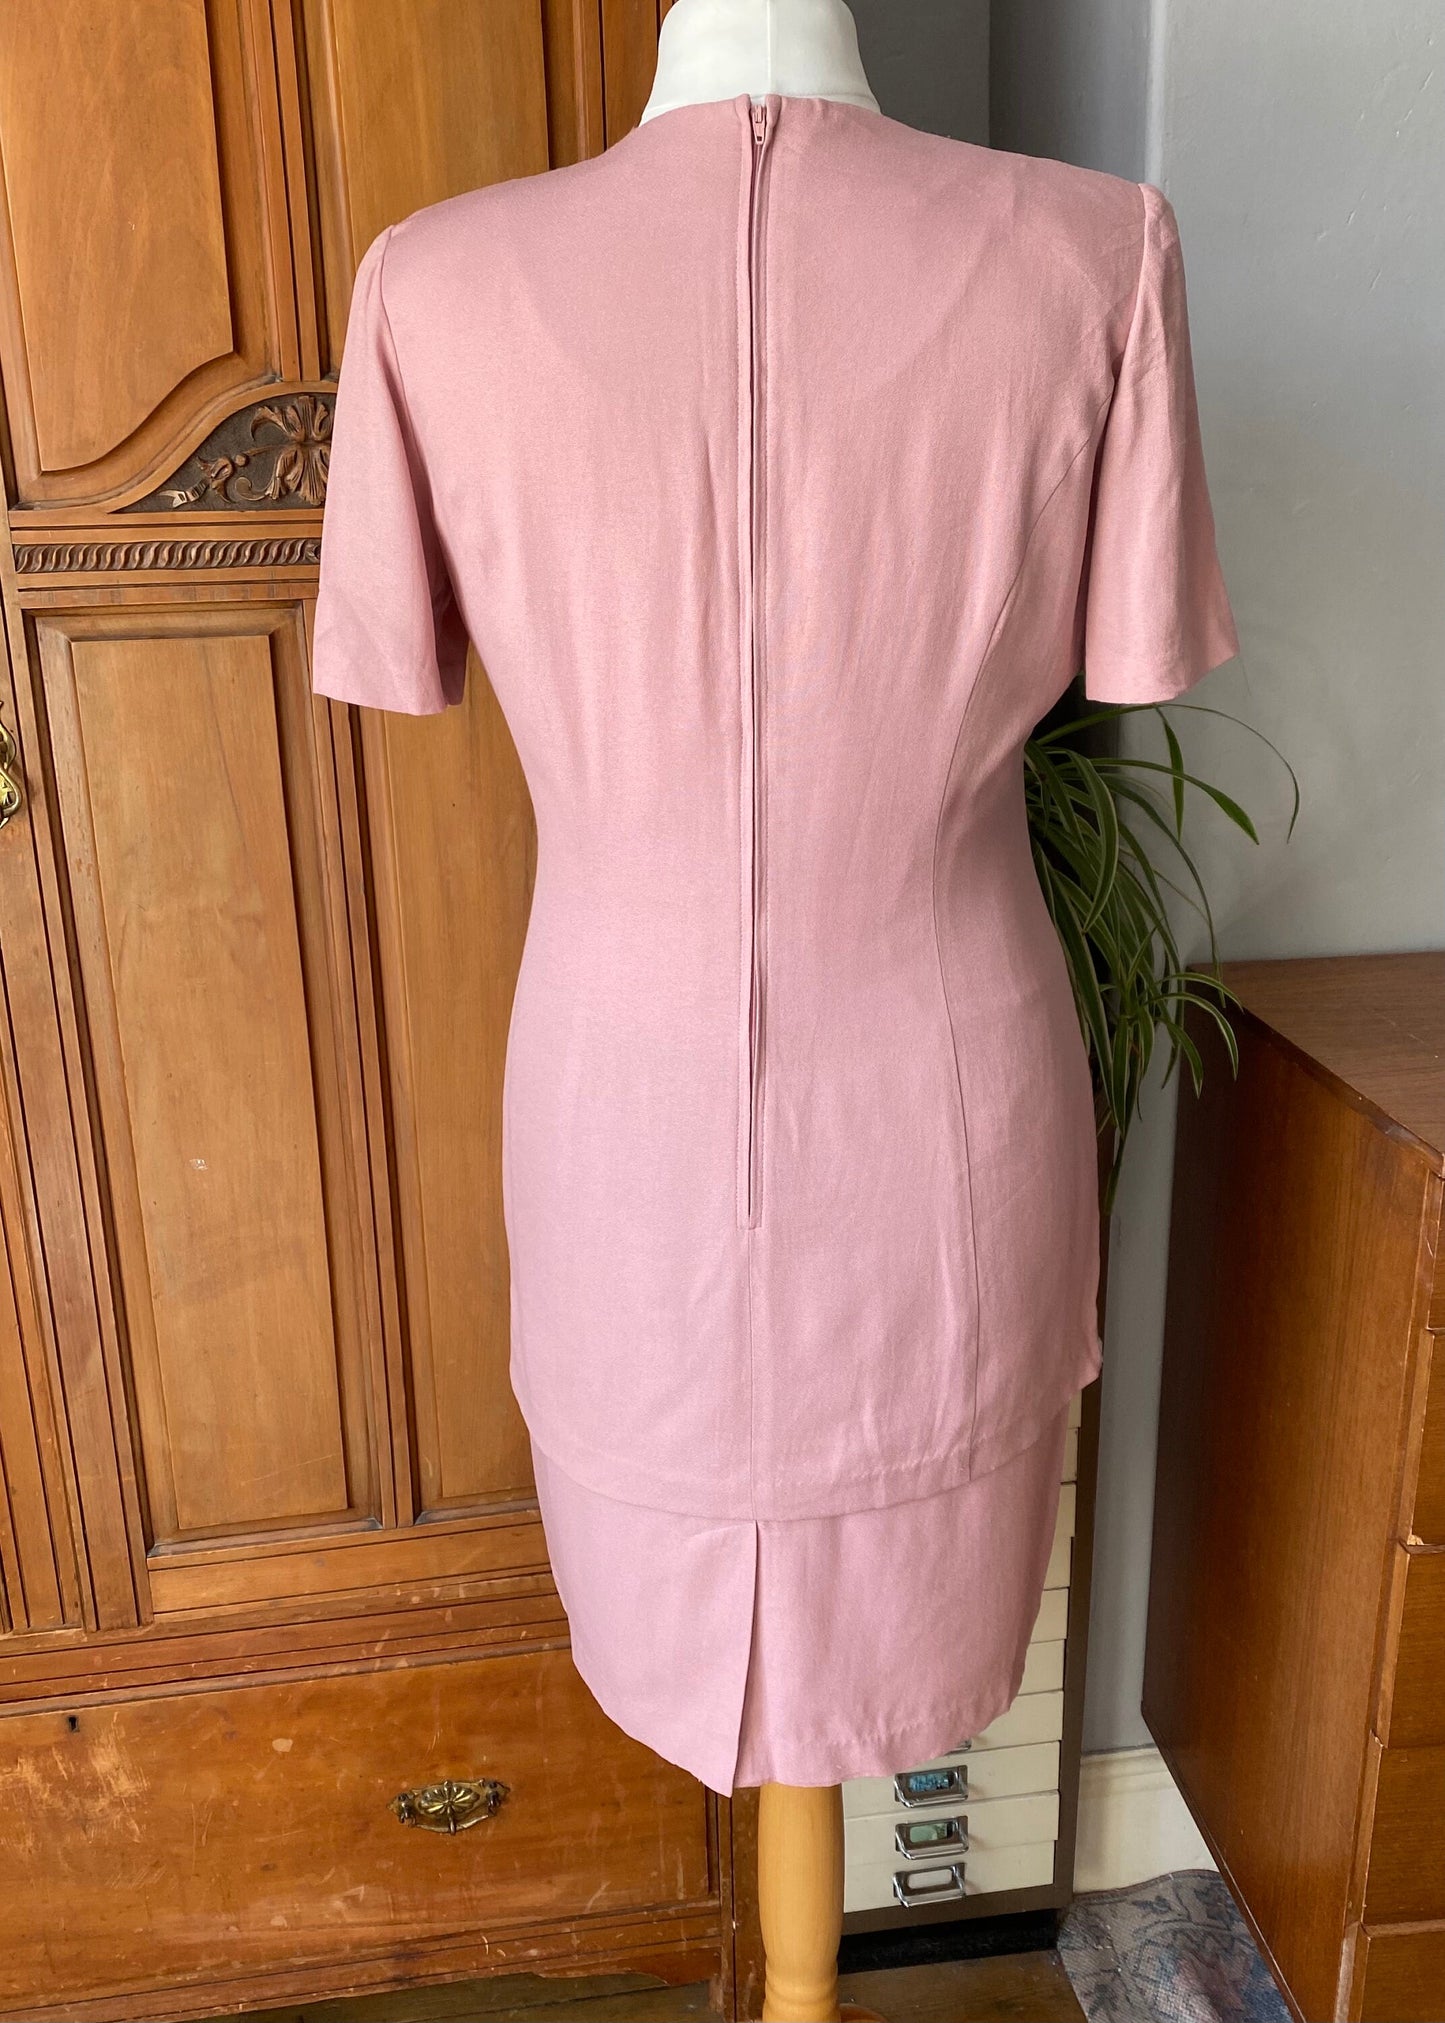 80s pink embroidered suit dress by Karin Stevens. Approx U. K. size  14-16